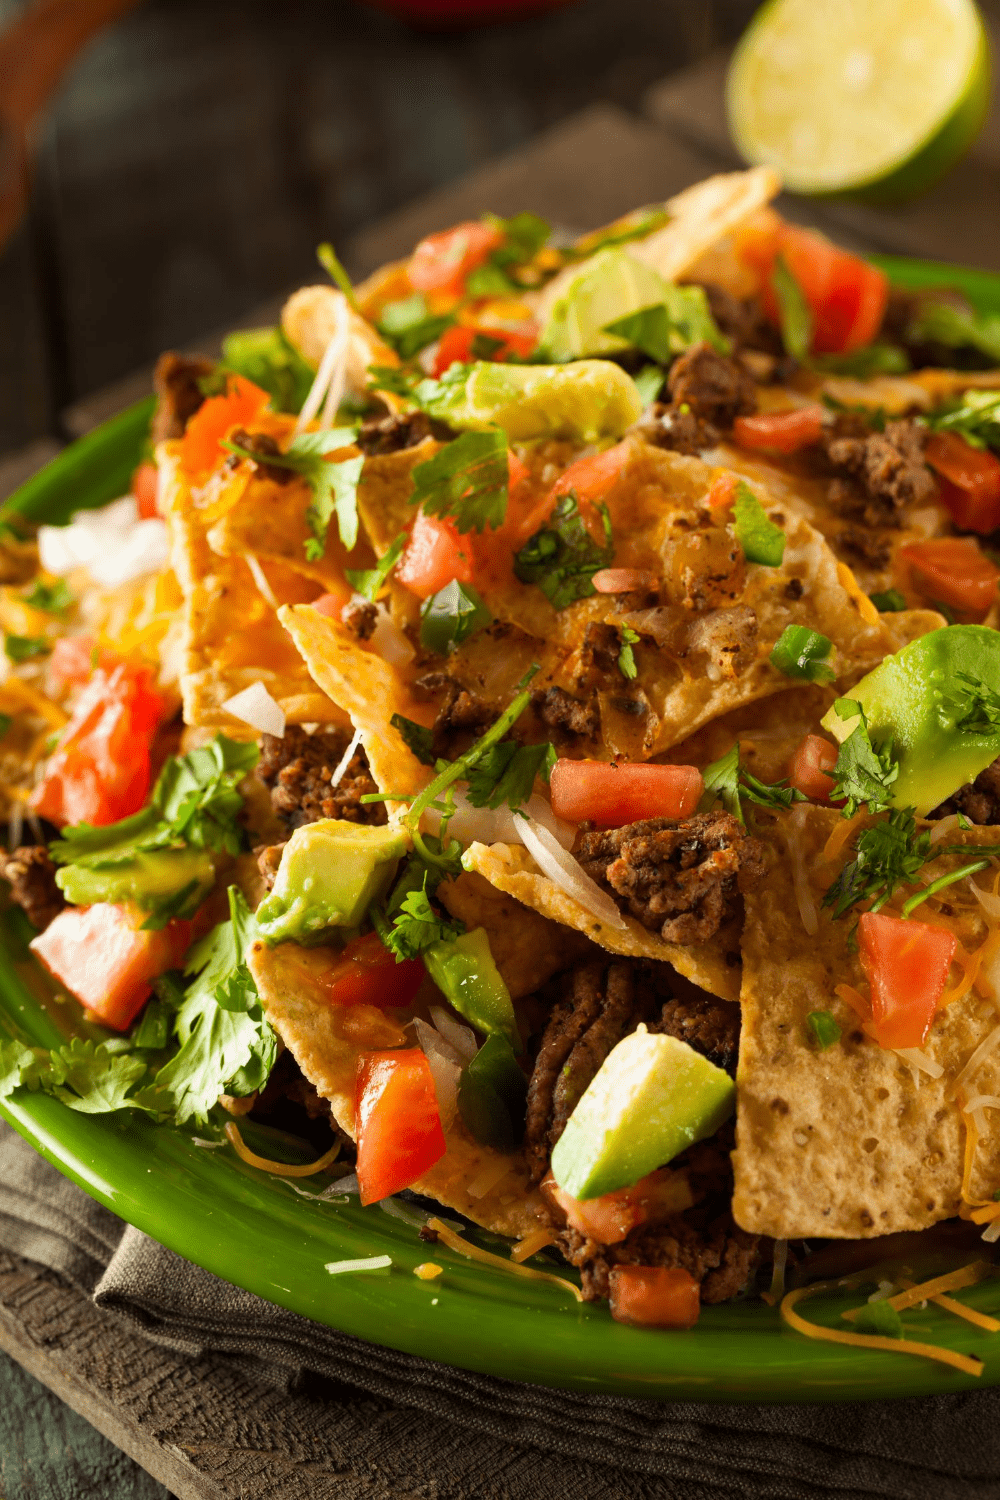 Loaded Nachos with Avocados, Tomatoes and Herbs